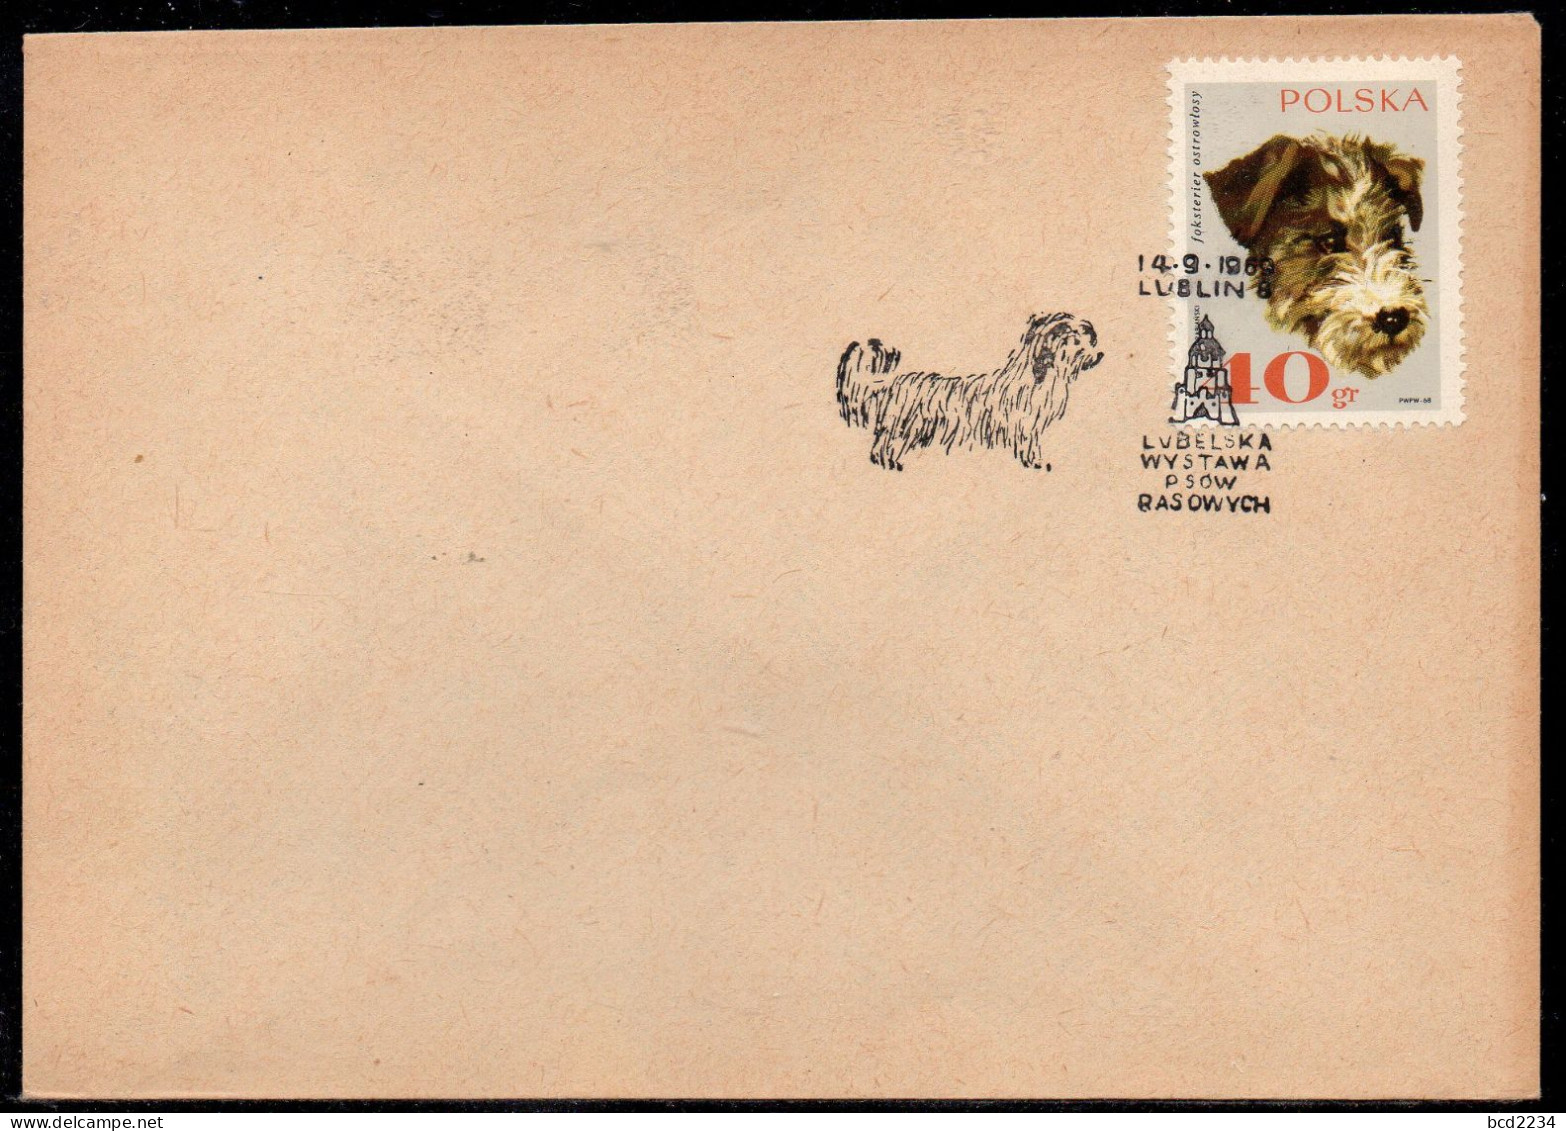 POLAND 1969 PEDIGREE DOG SHOW LUBLIN SPECIAL CANCEL ON COVER DOGS - Chiens